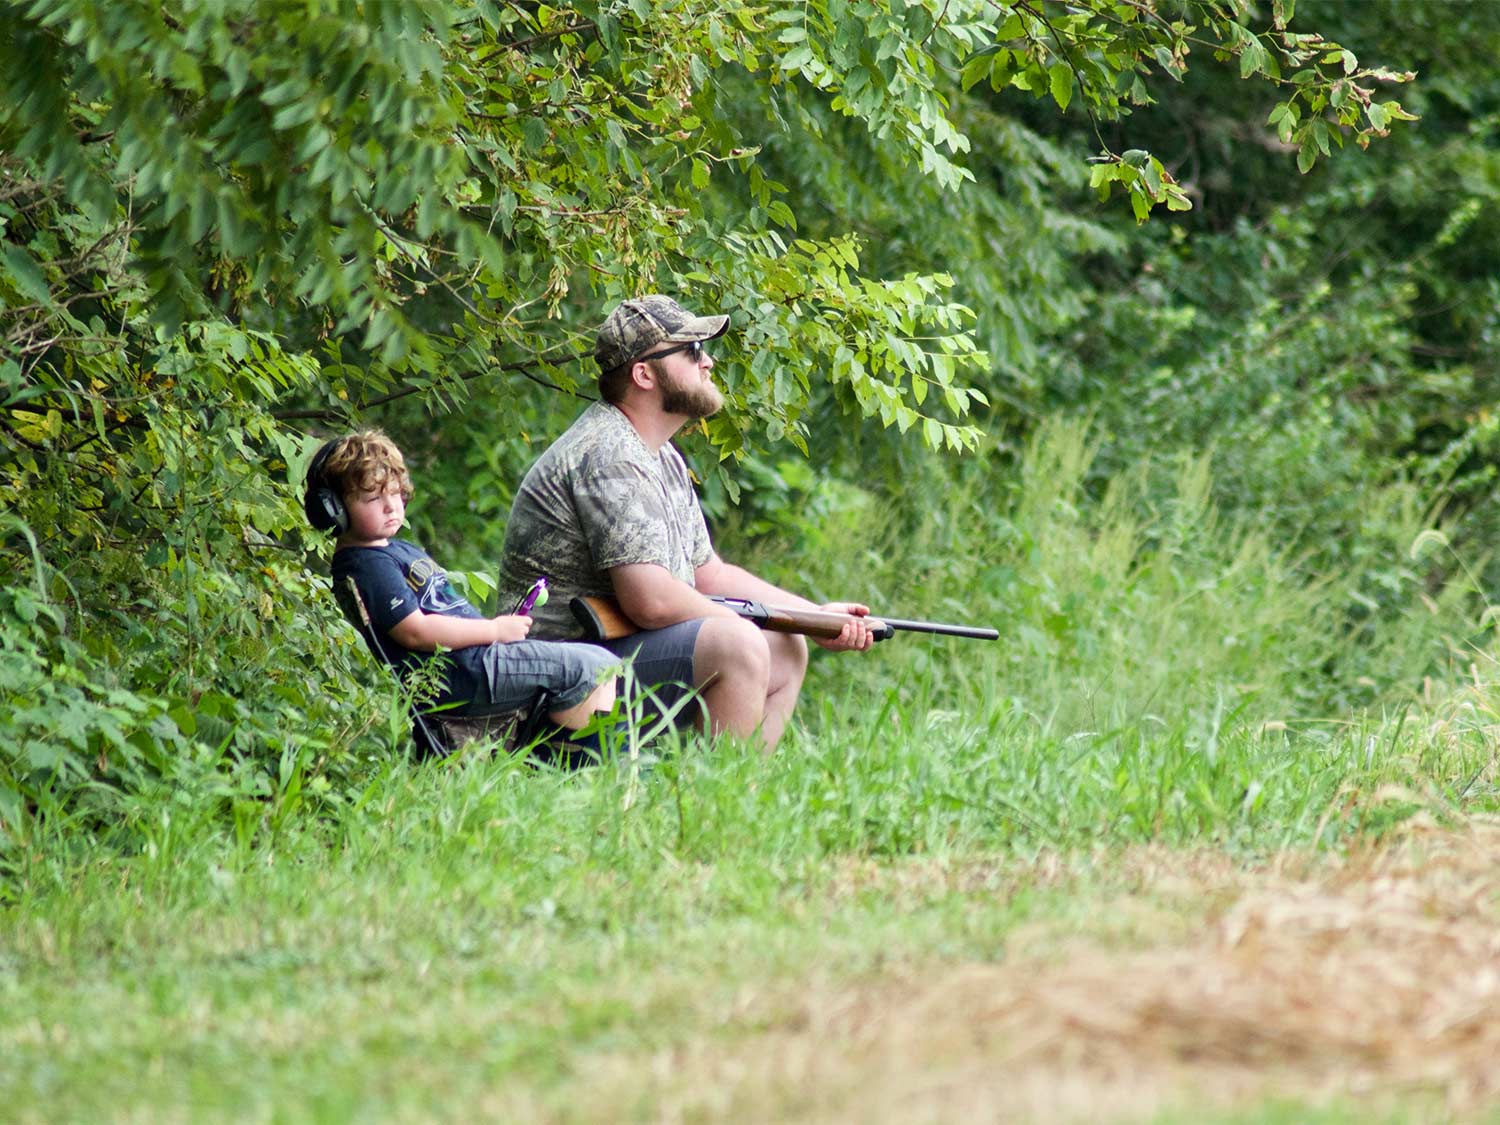 A man and a young kid sit at the edge of a field for hunting.